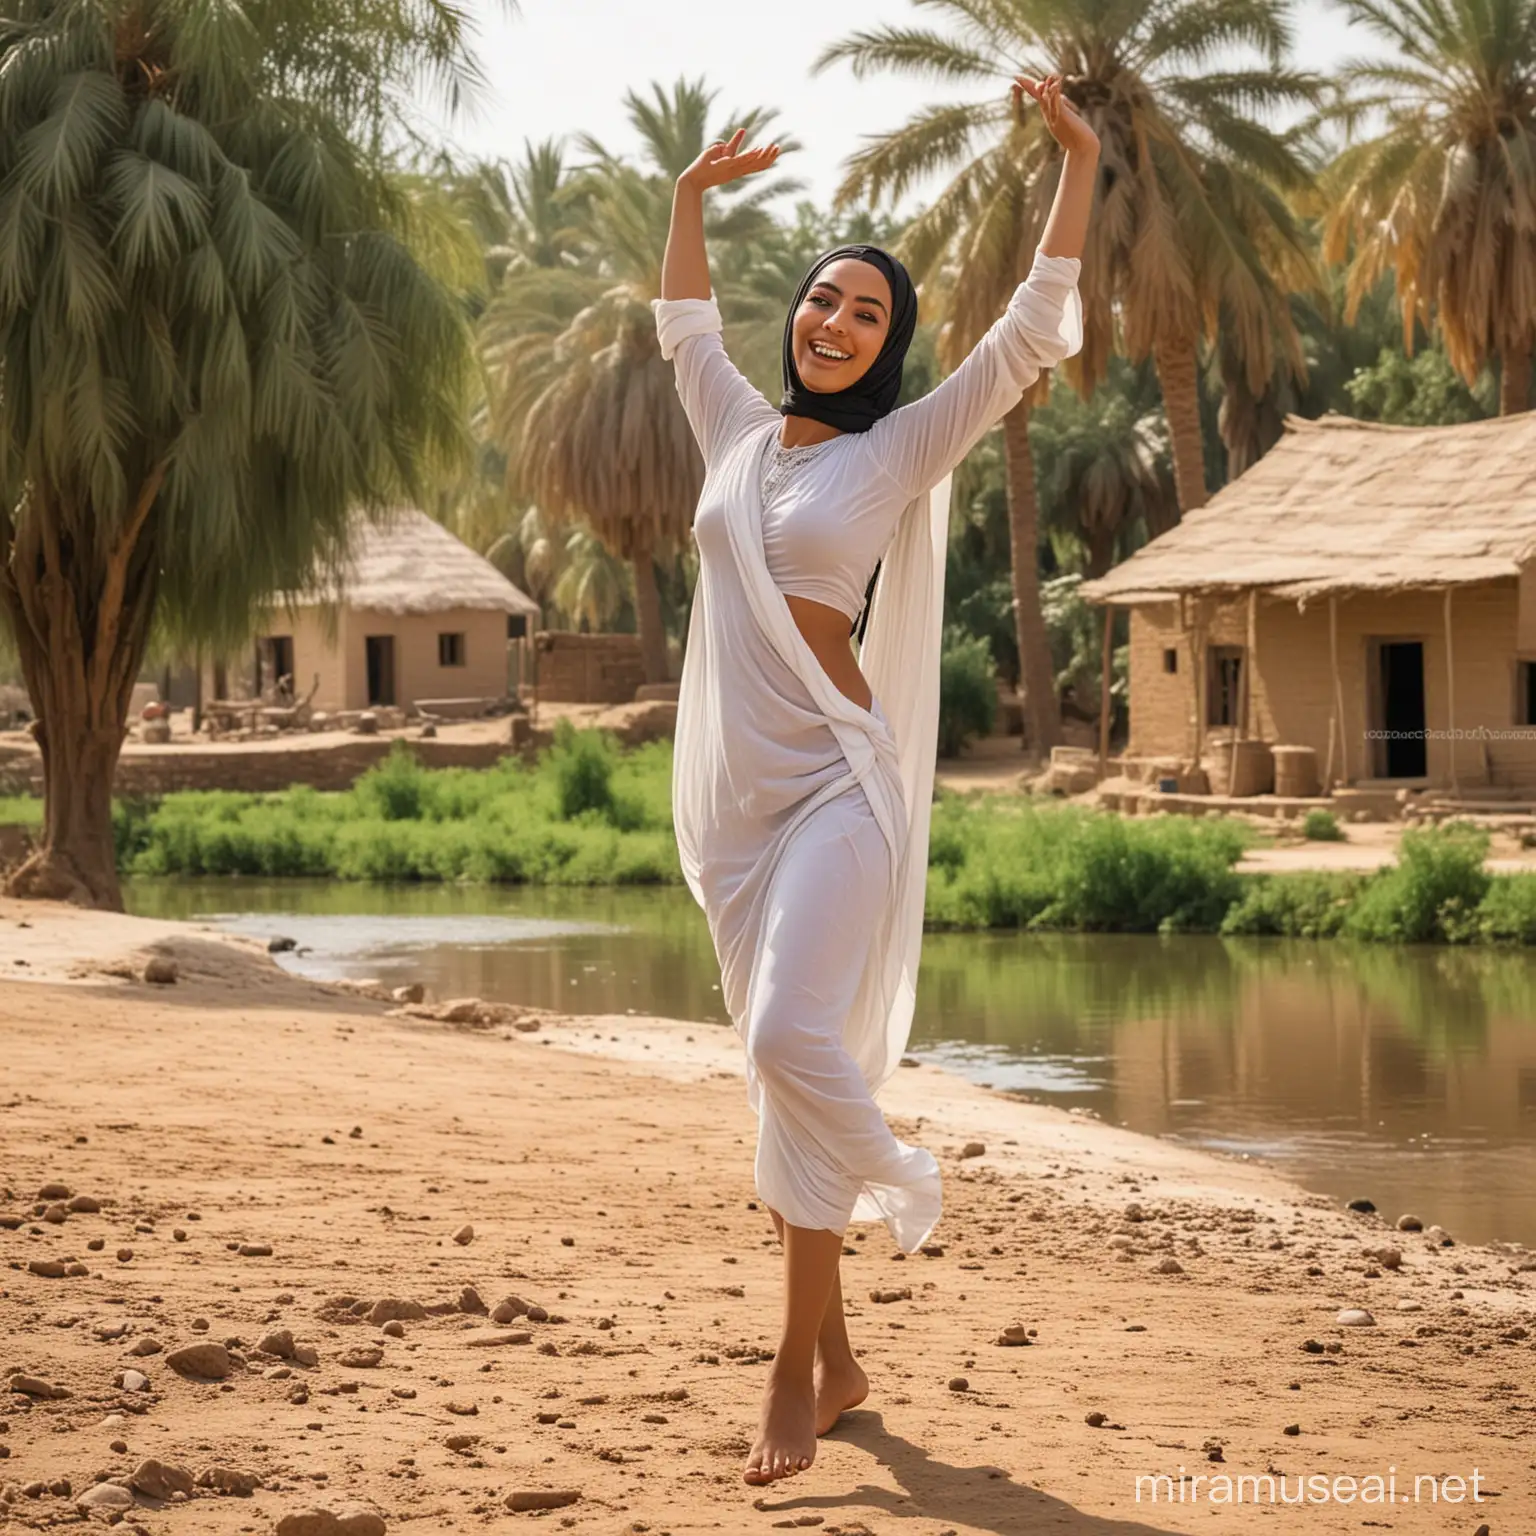 Egyptian hijab woman dancing nude in front of her village house near river trees and farm fields